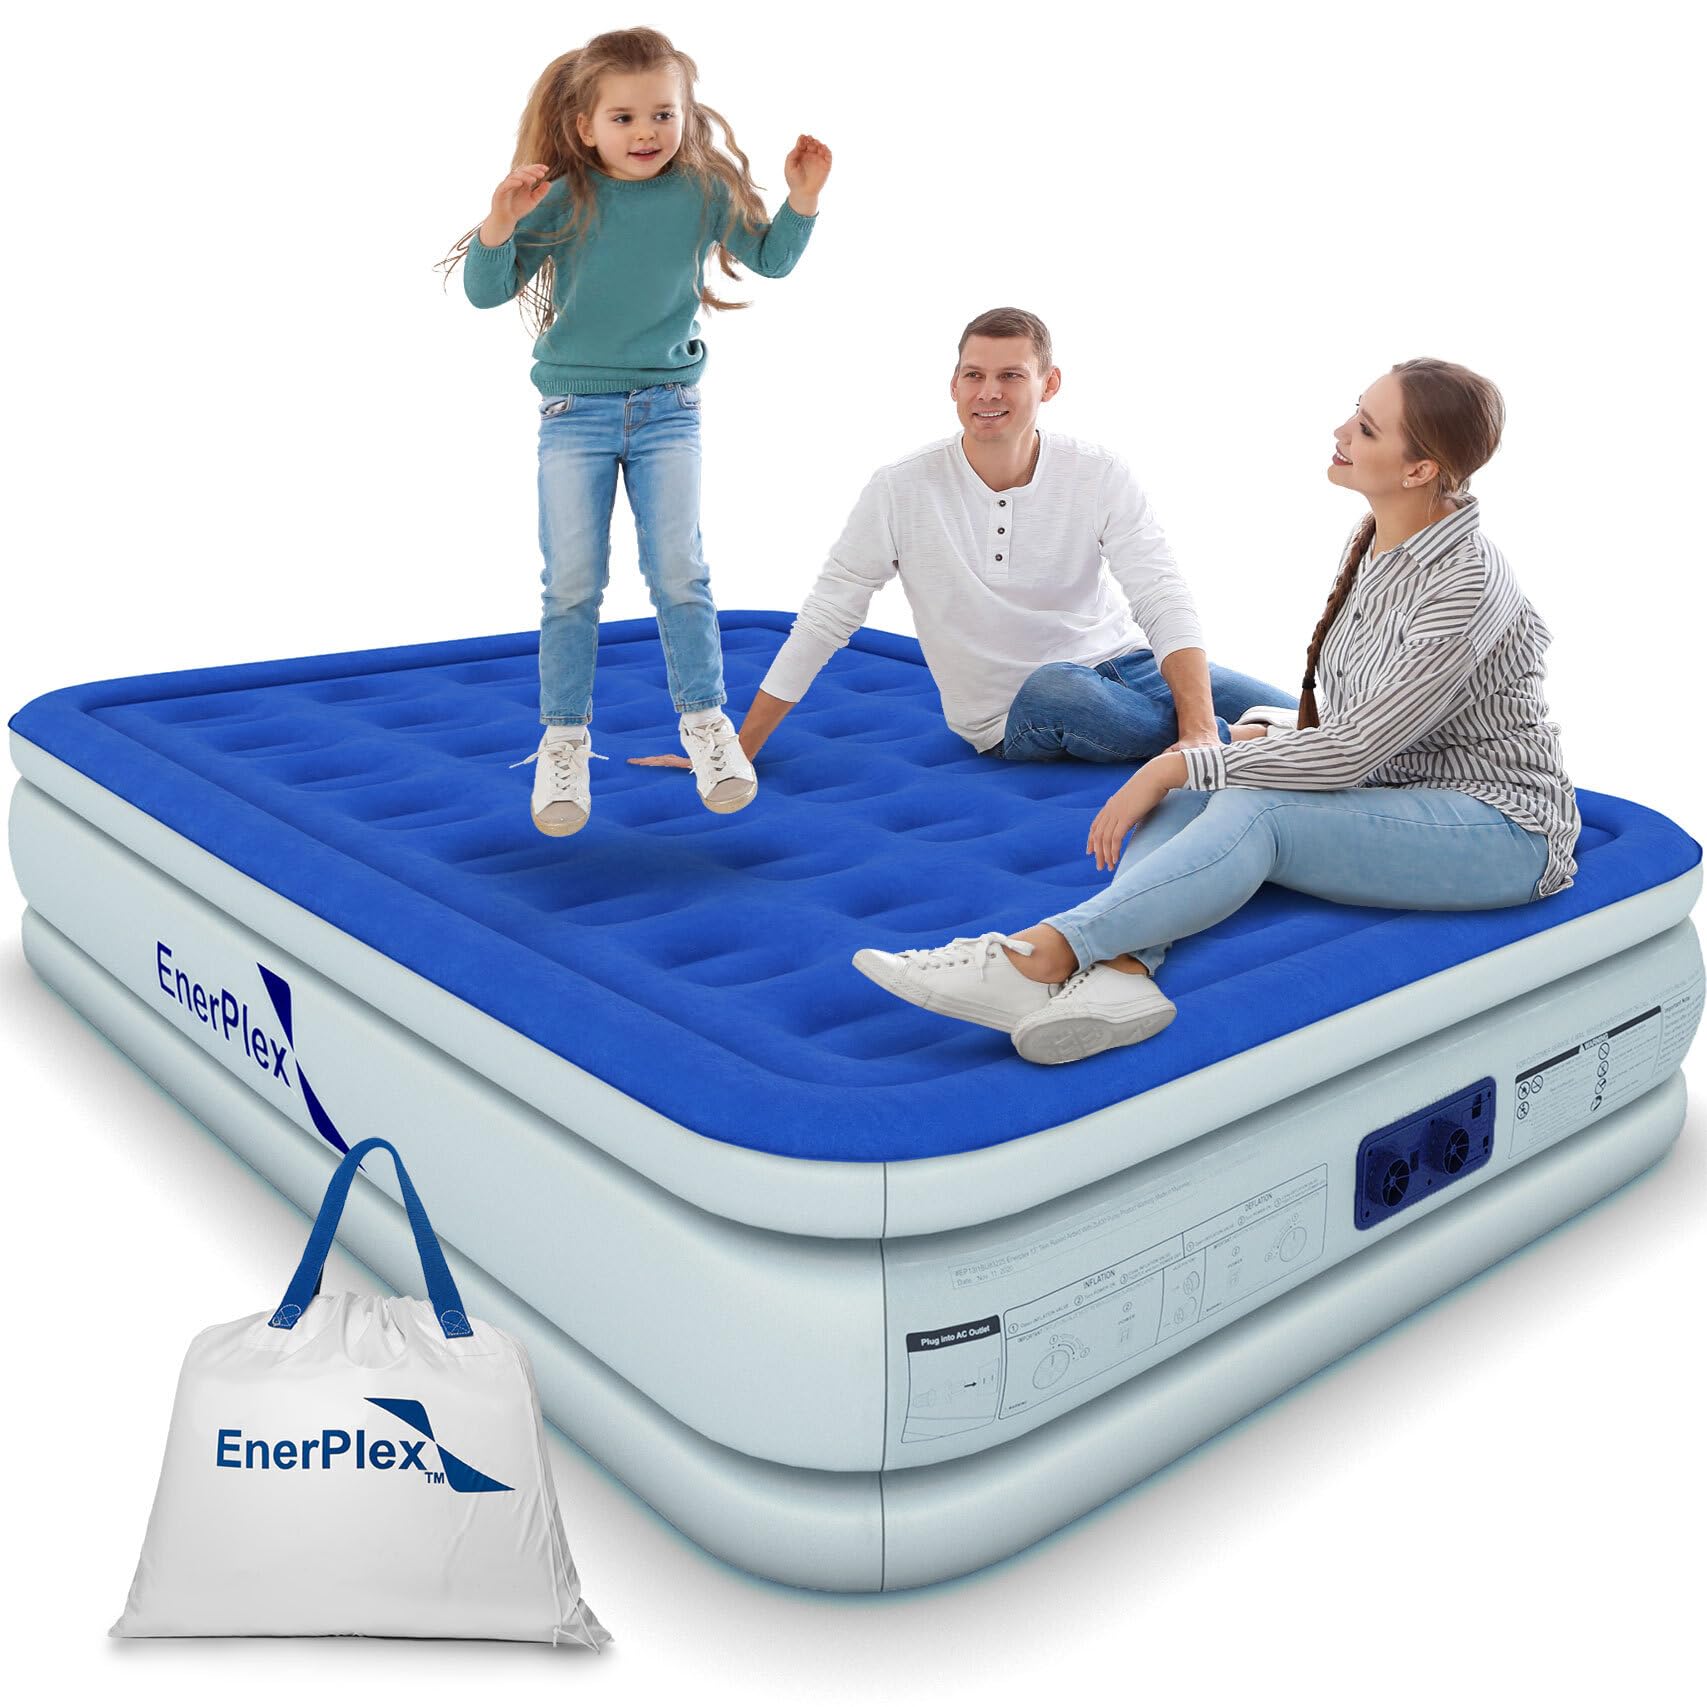 EnerPlex Air Mattress with Built-in Pump - Double Height Inflatable Mattress for Camping, Home & Portable Travel - Durable Blow Up Bed with Dual Pump - Easy to Inflate/Quick Set UP